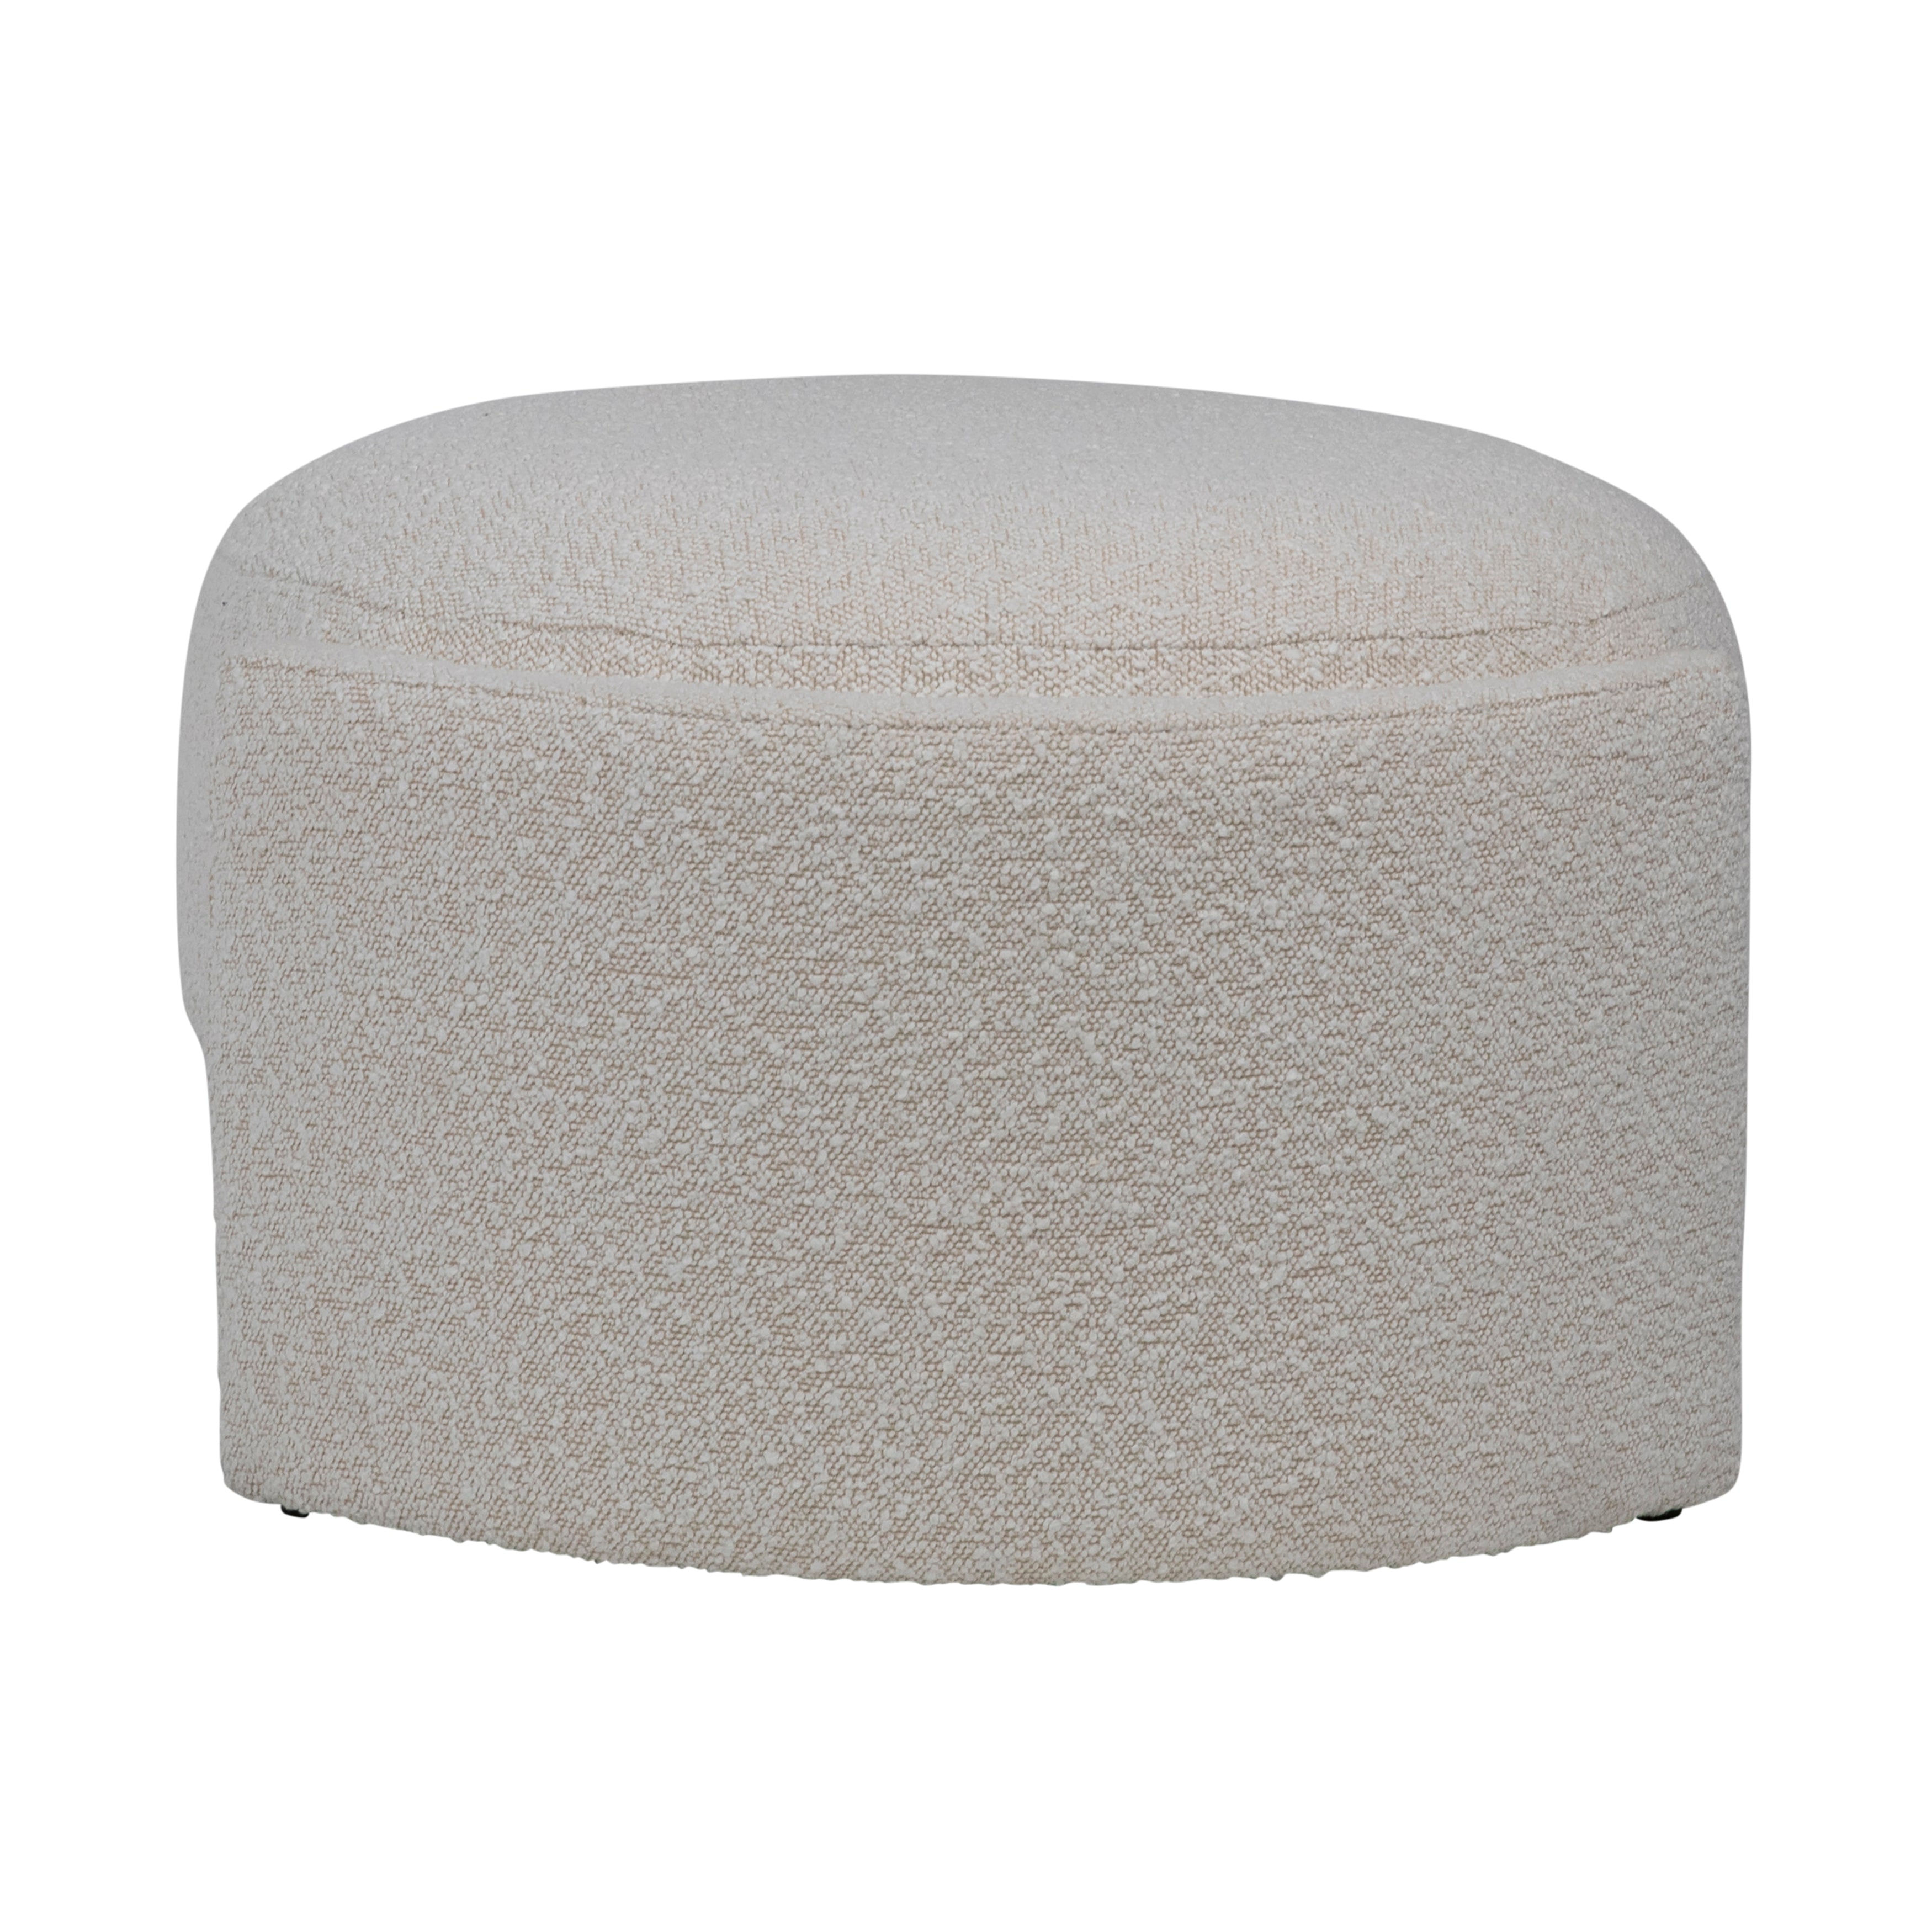 Add a contemporary touch to your seating arrangement with this lovely ottoman. Featuring a round frame supported by a stunning off-white boucle upholstery for extra softness and comfort. Use this 16x28” ottoman as a center table to display small tray and knick-knacks or as a place to prop your feet up after a long day.Depth : 25.5 in Amethyst Home provides interior design, new home construction design consulting, vintage area rugs, and lighting in the Nashville metro area.